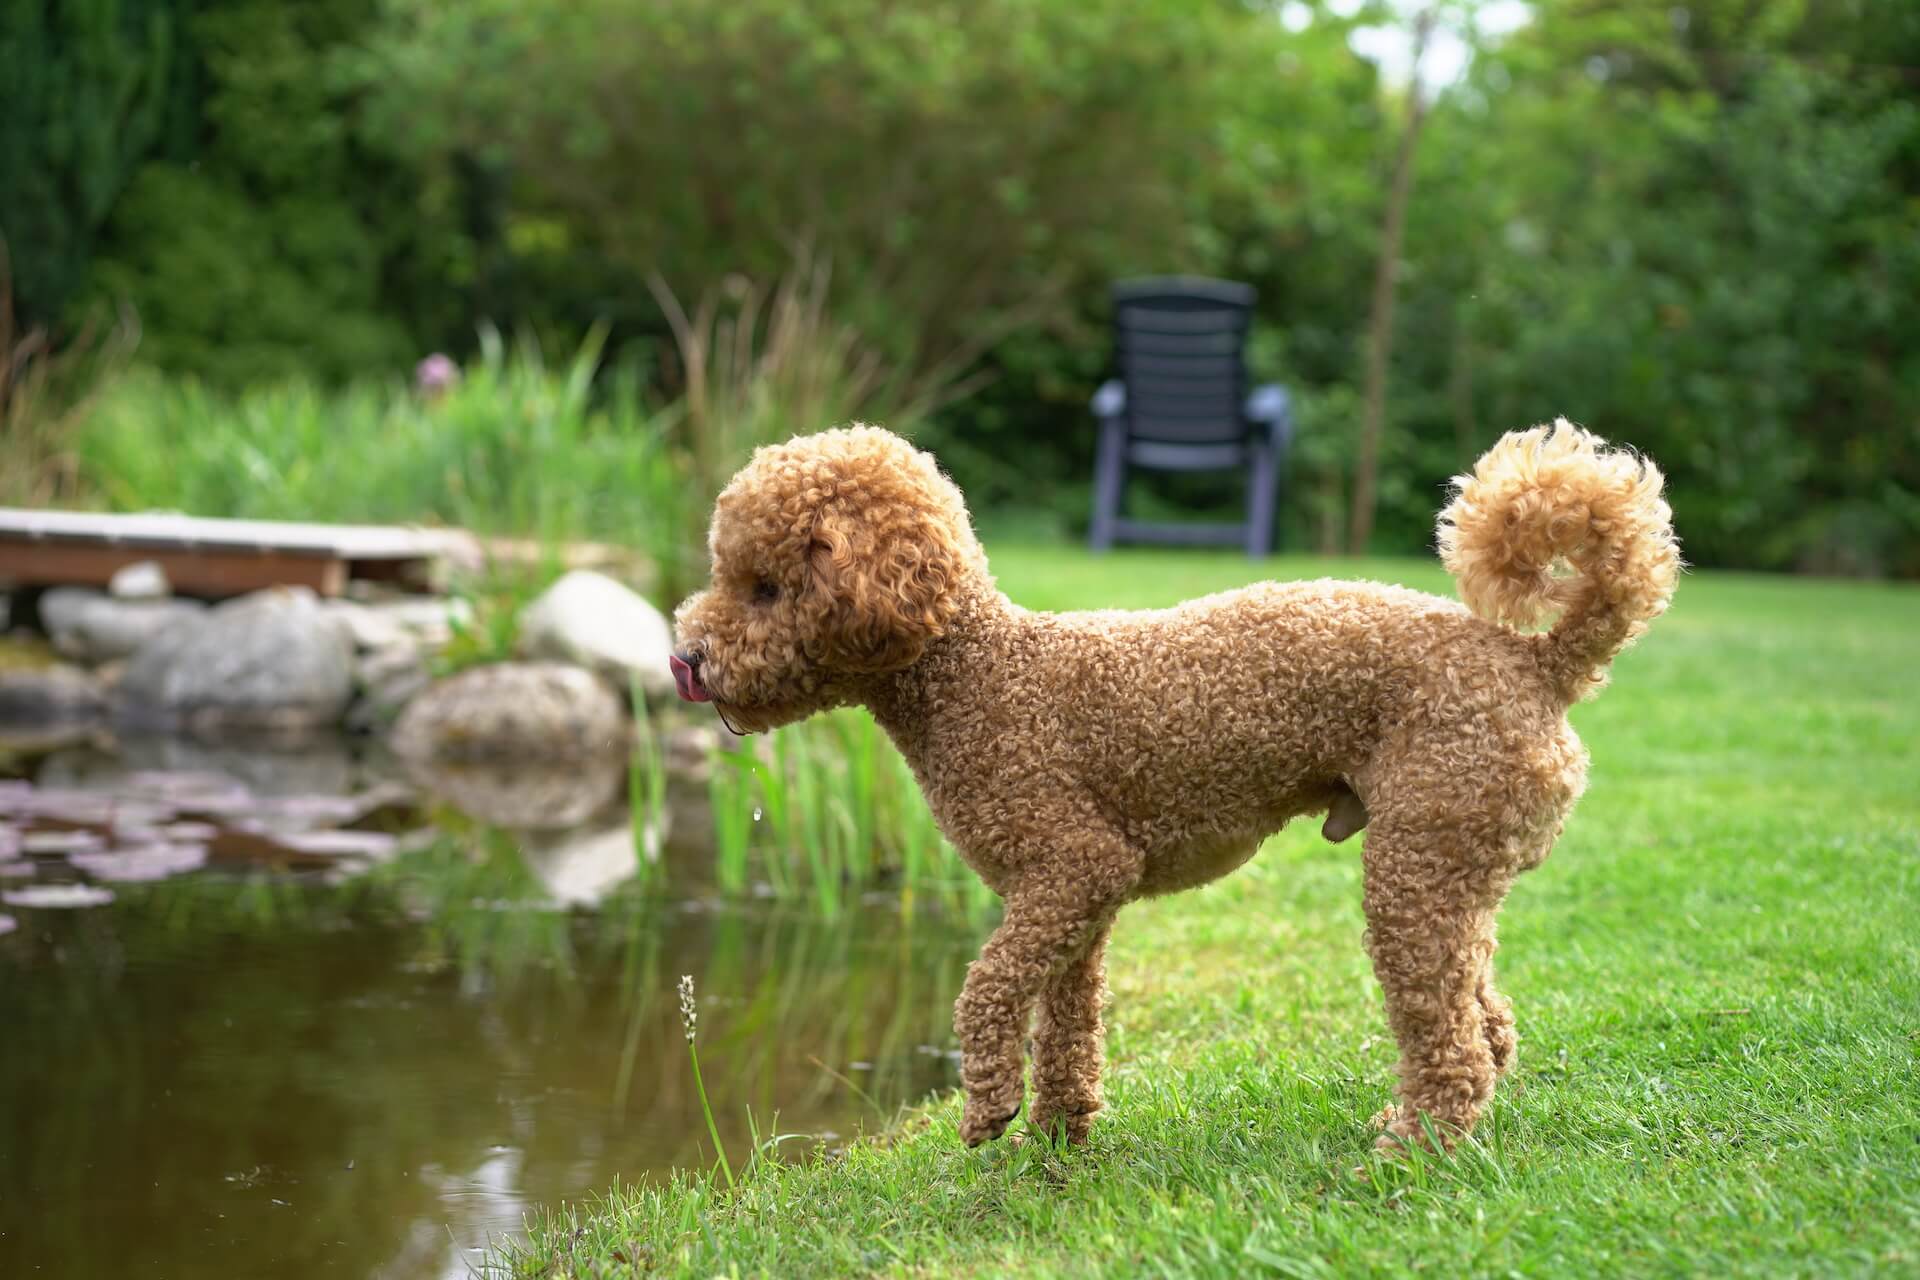 is the poodle legal in ireland